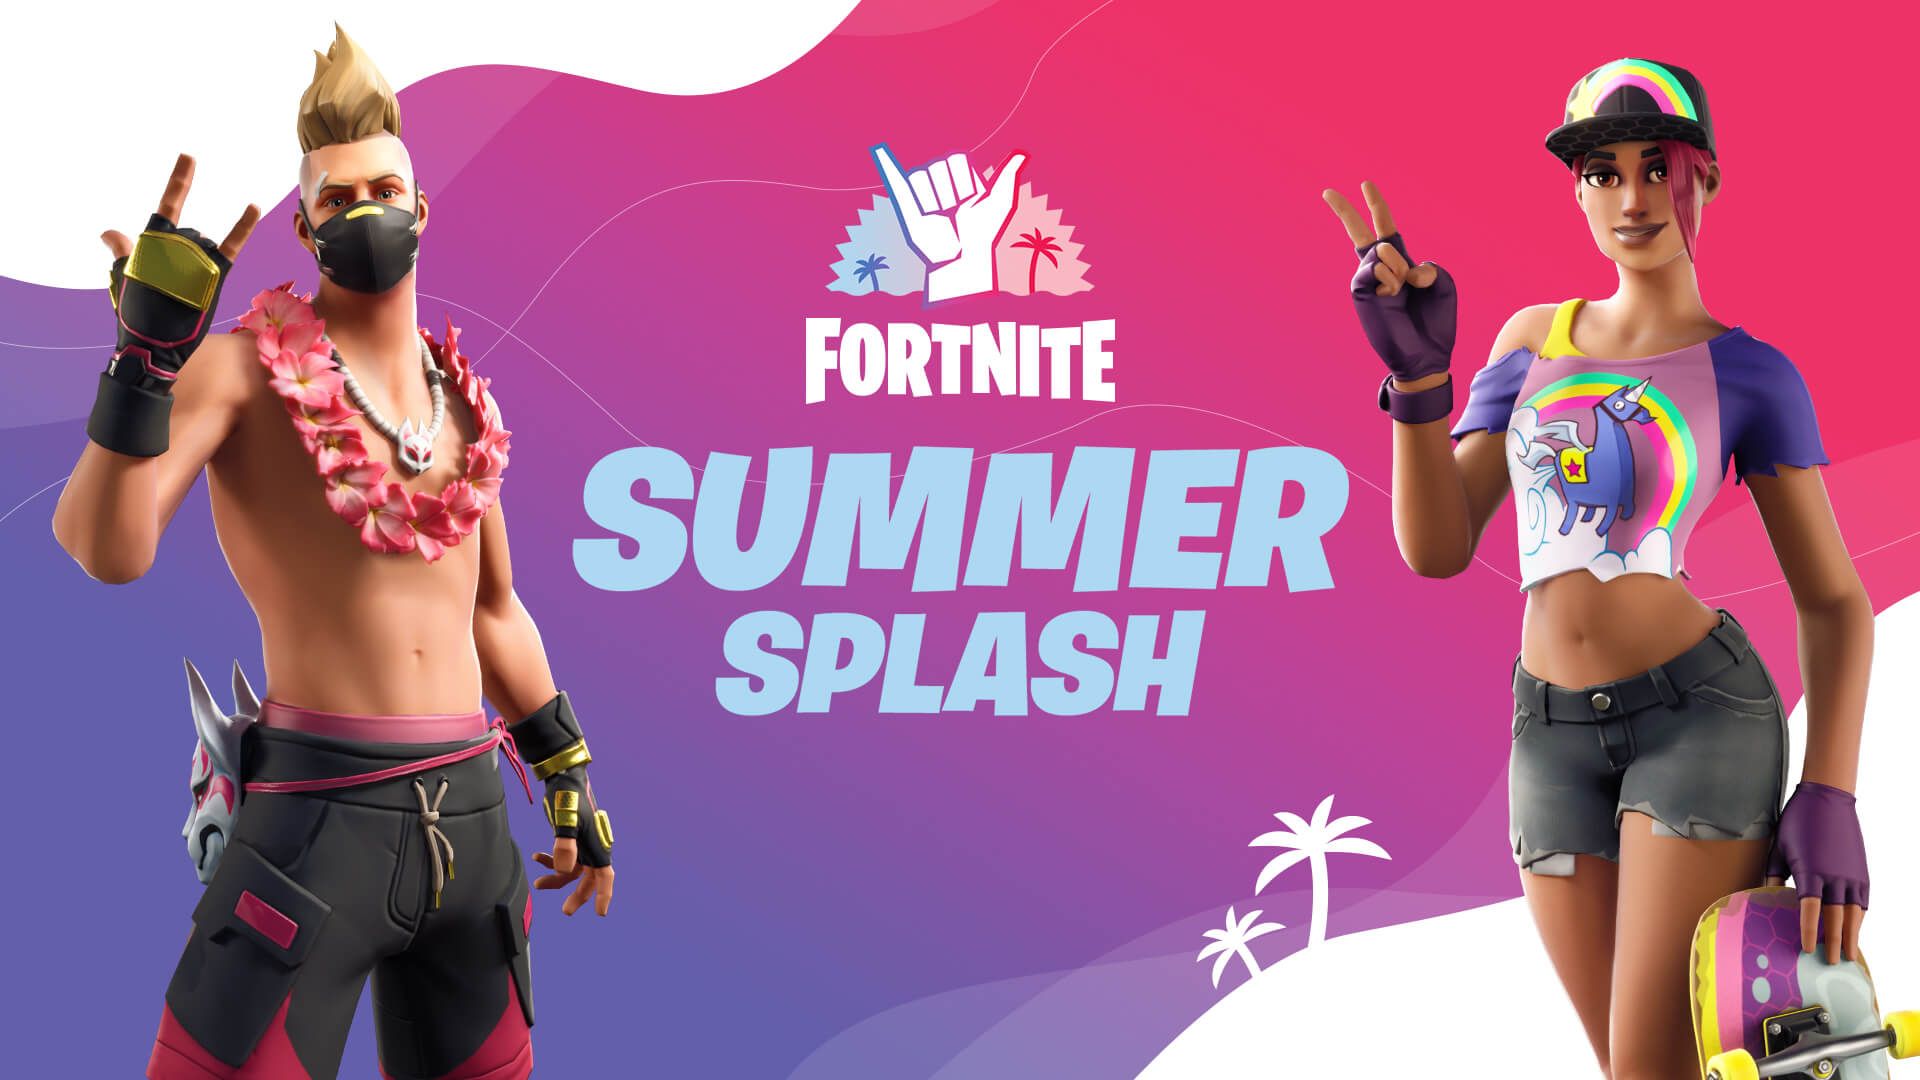 Fortnite Summer Splash 2020: Limited Time Event, New Game Modes, Summer Themed Outfits, Returning Outfits